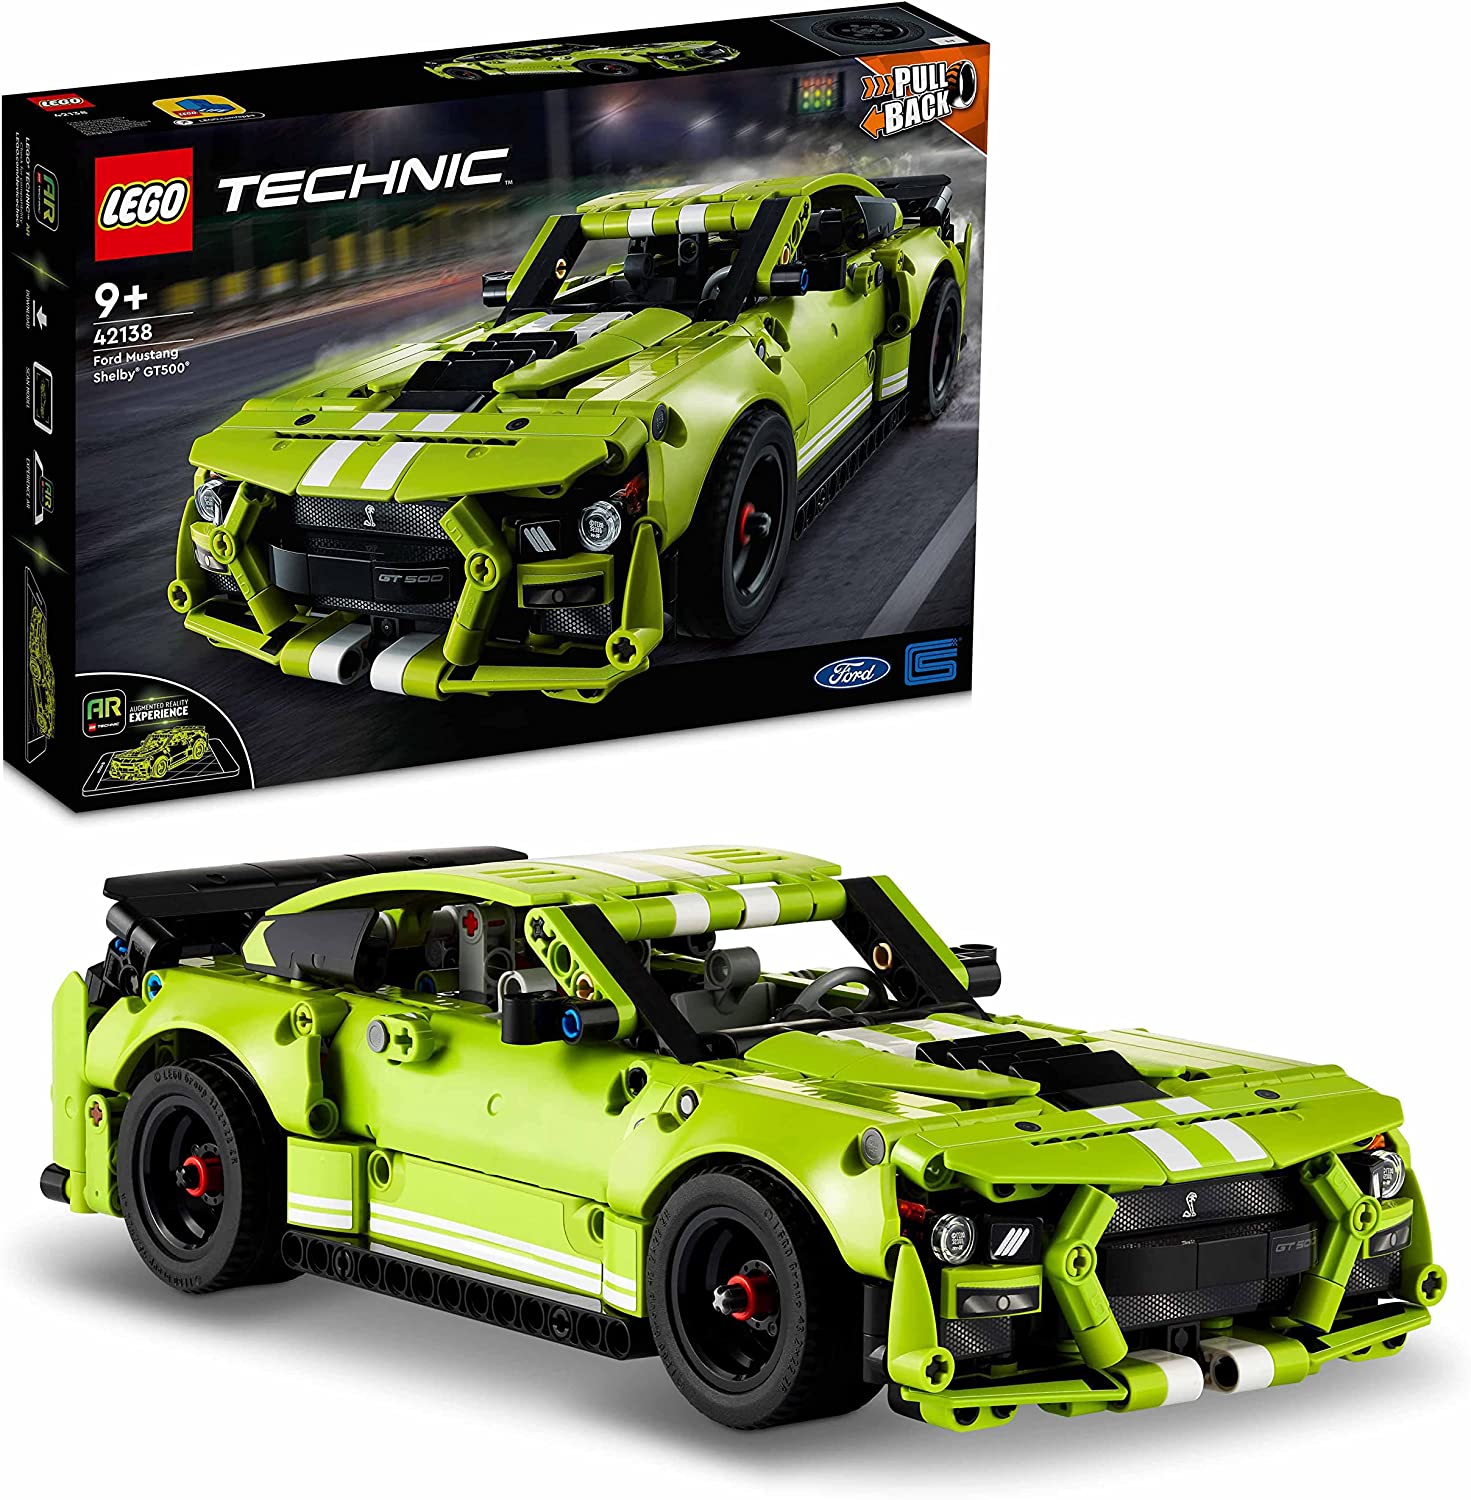 LEGO 42138 Technic Ford Mustang Shelby GT500, Modellauto-Bausatz, Spielzeug